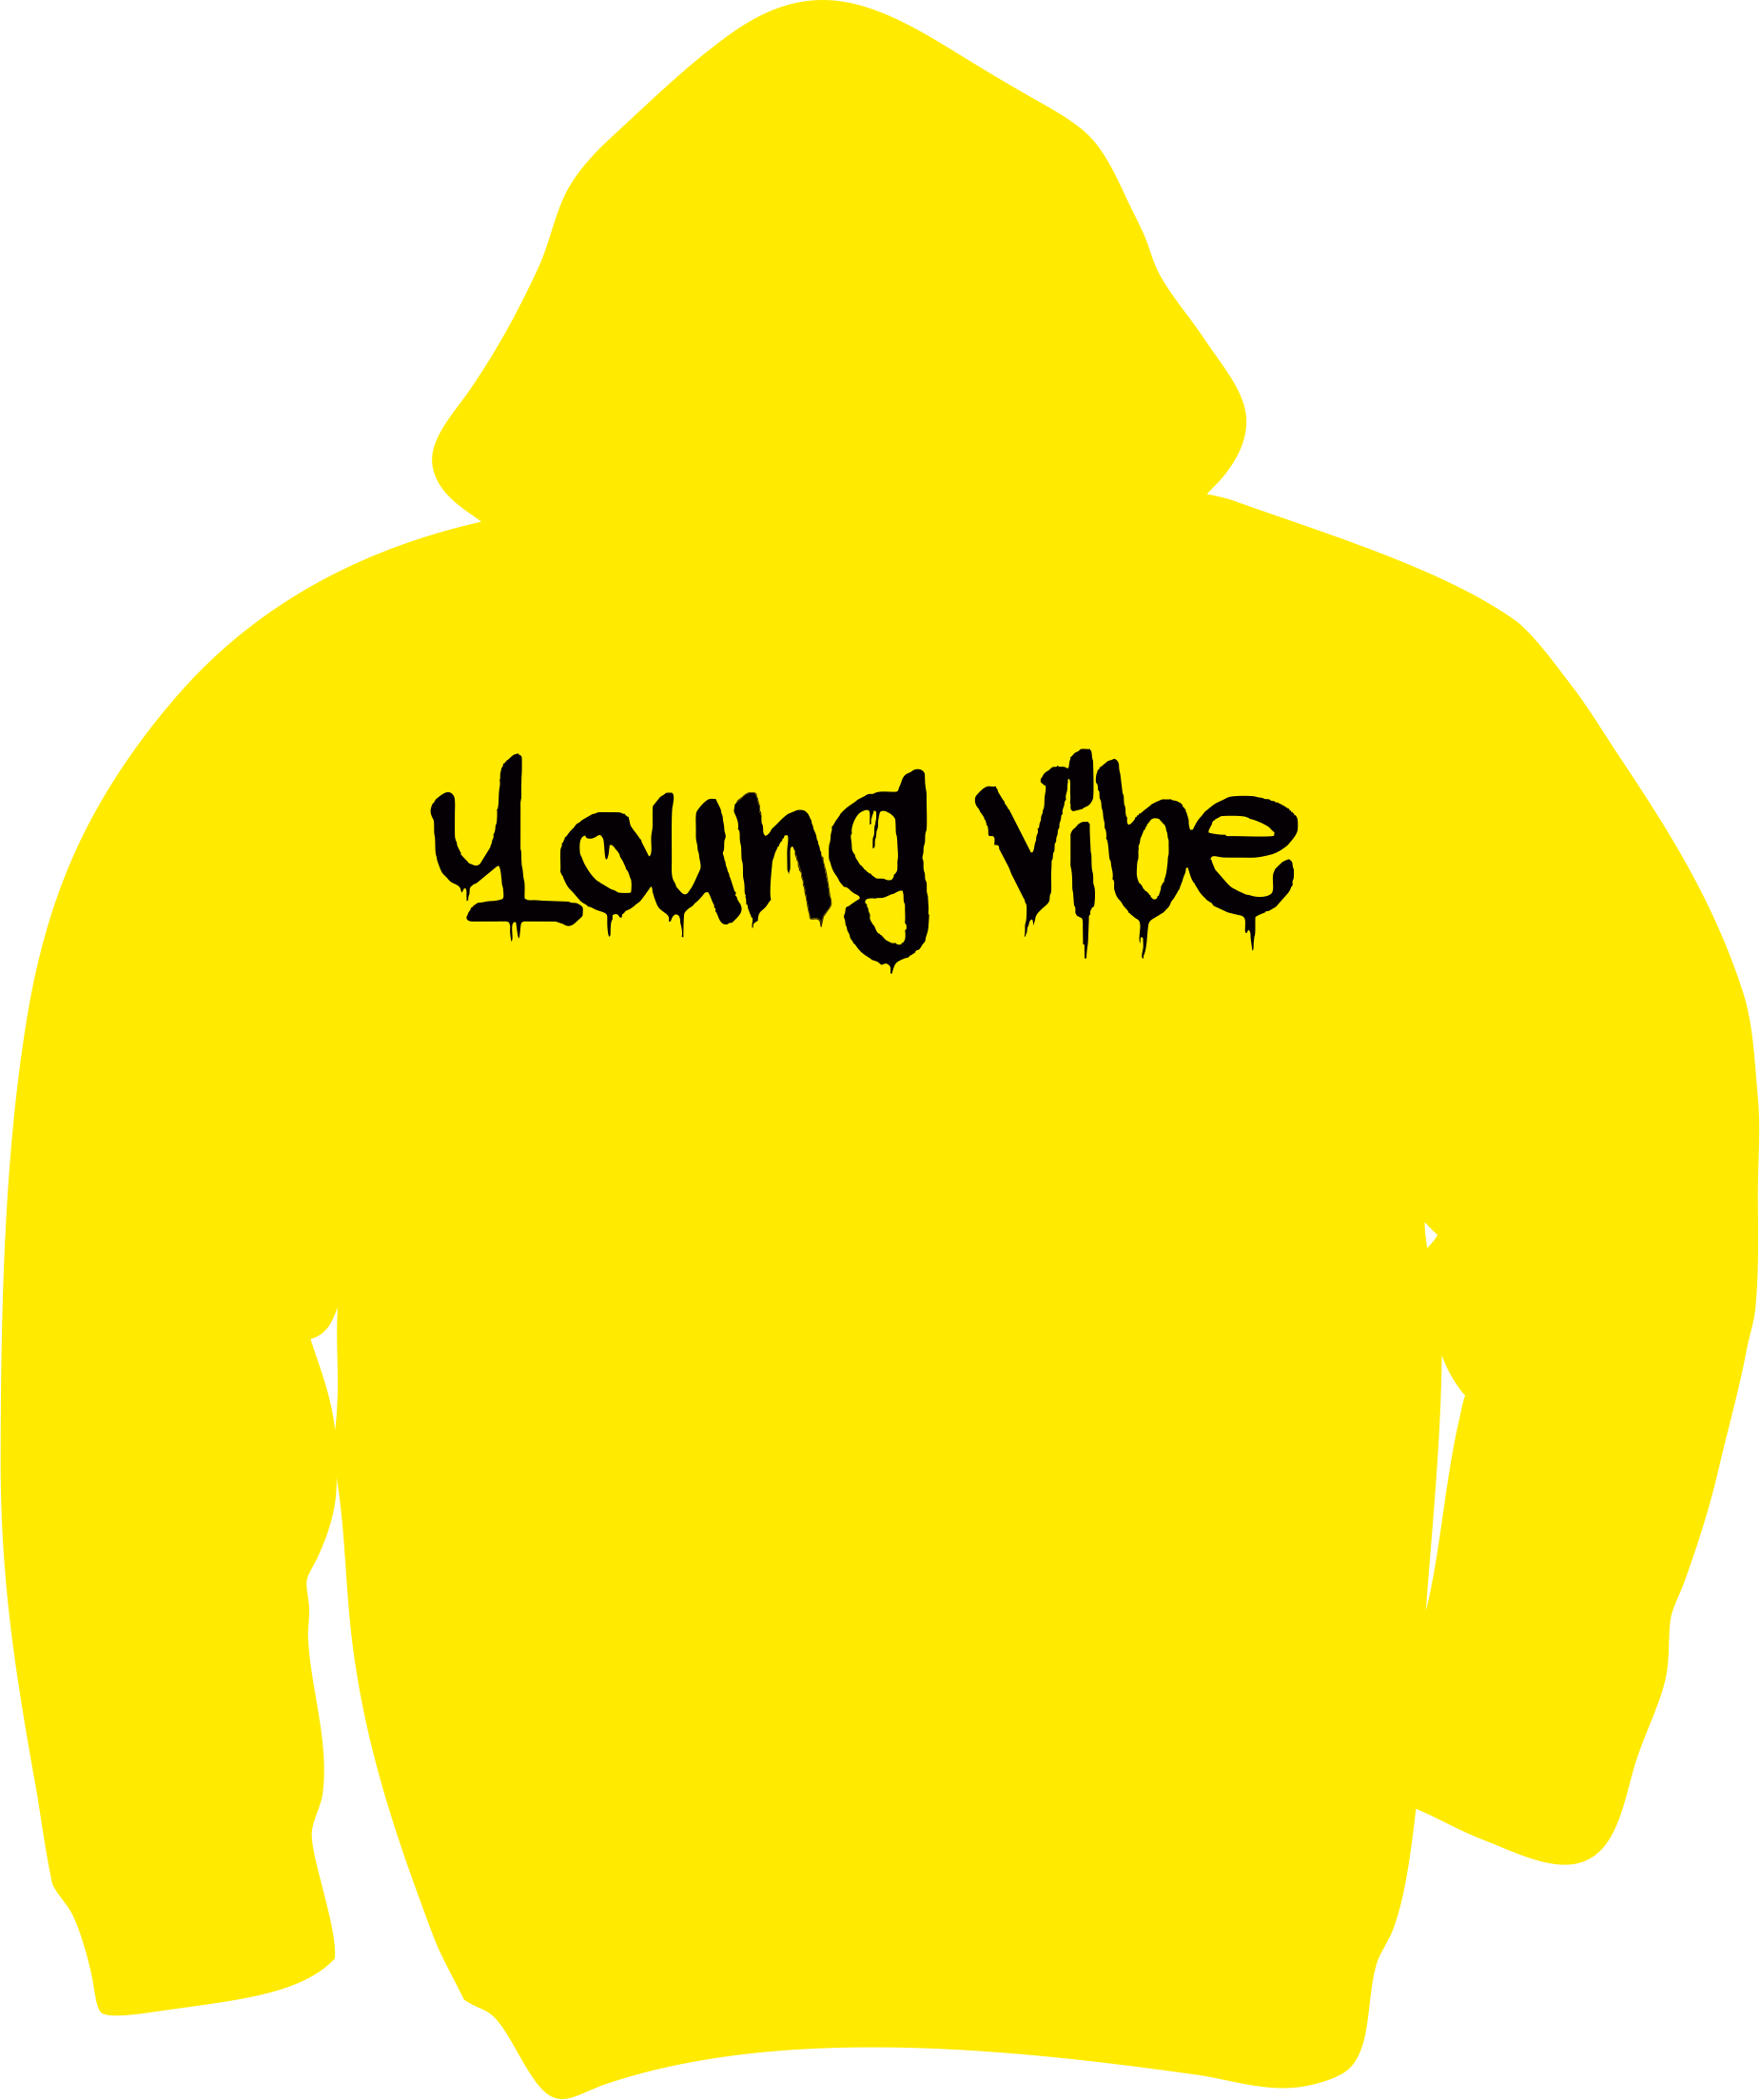 Youth Creation Competition Team Childs Hoodie